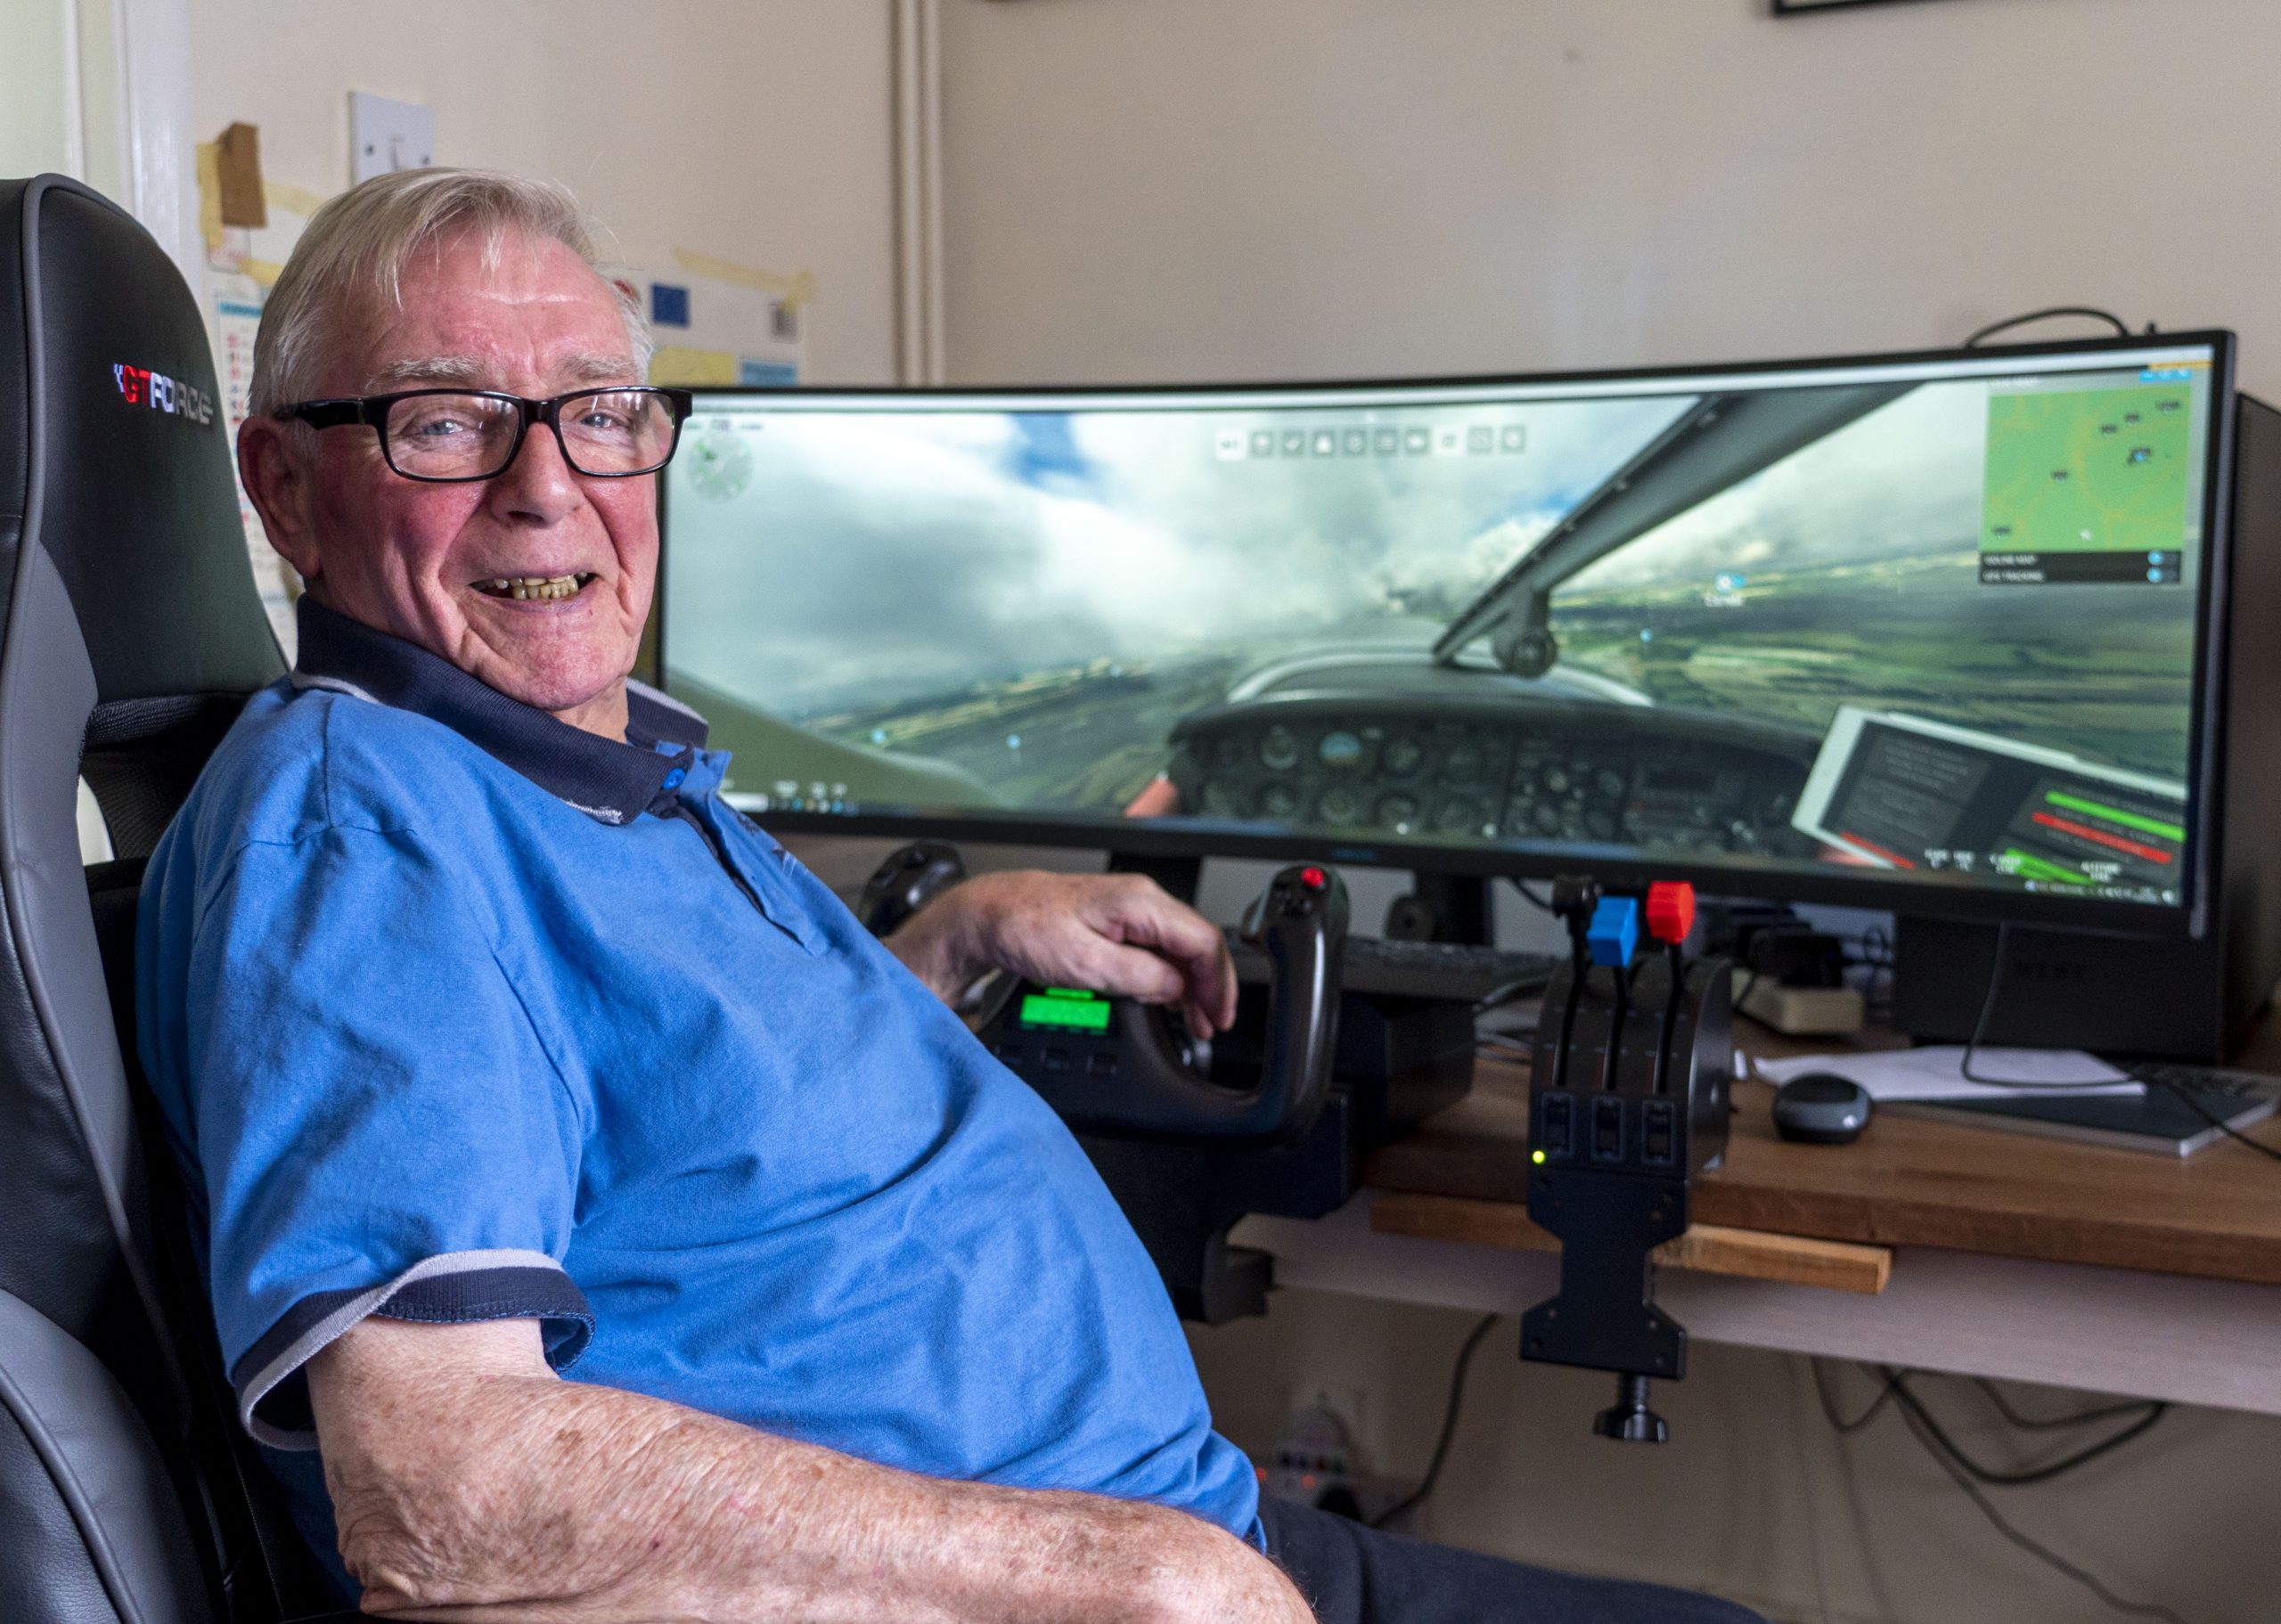 Frank Durrans, 85-year-old ex-serviceman and Flight Sim fan, at his home in Andover